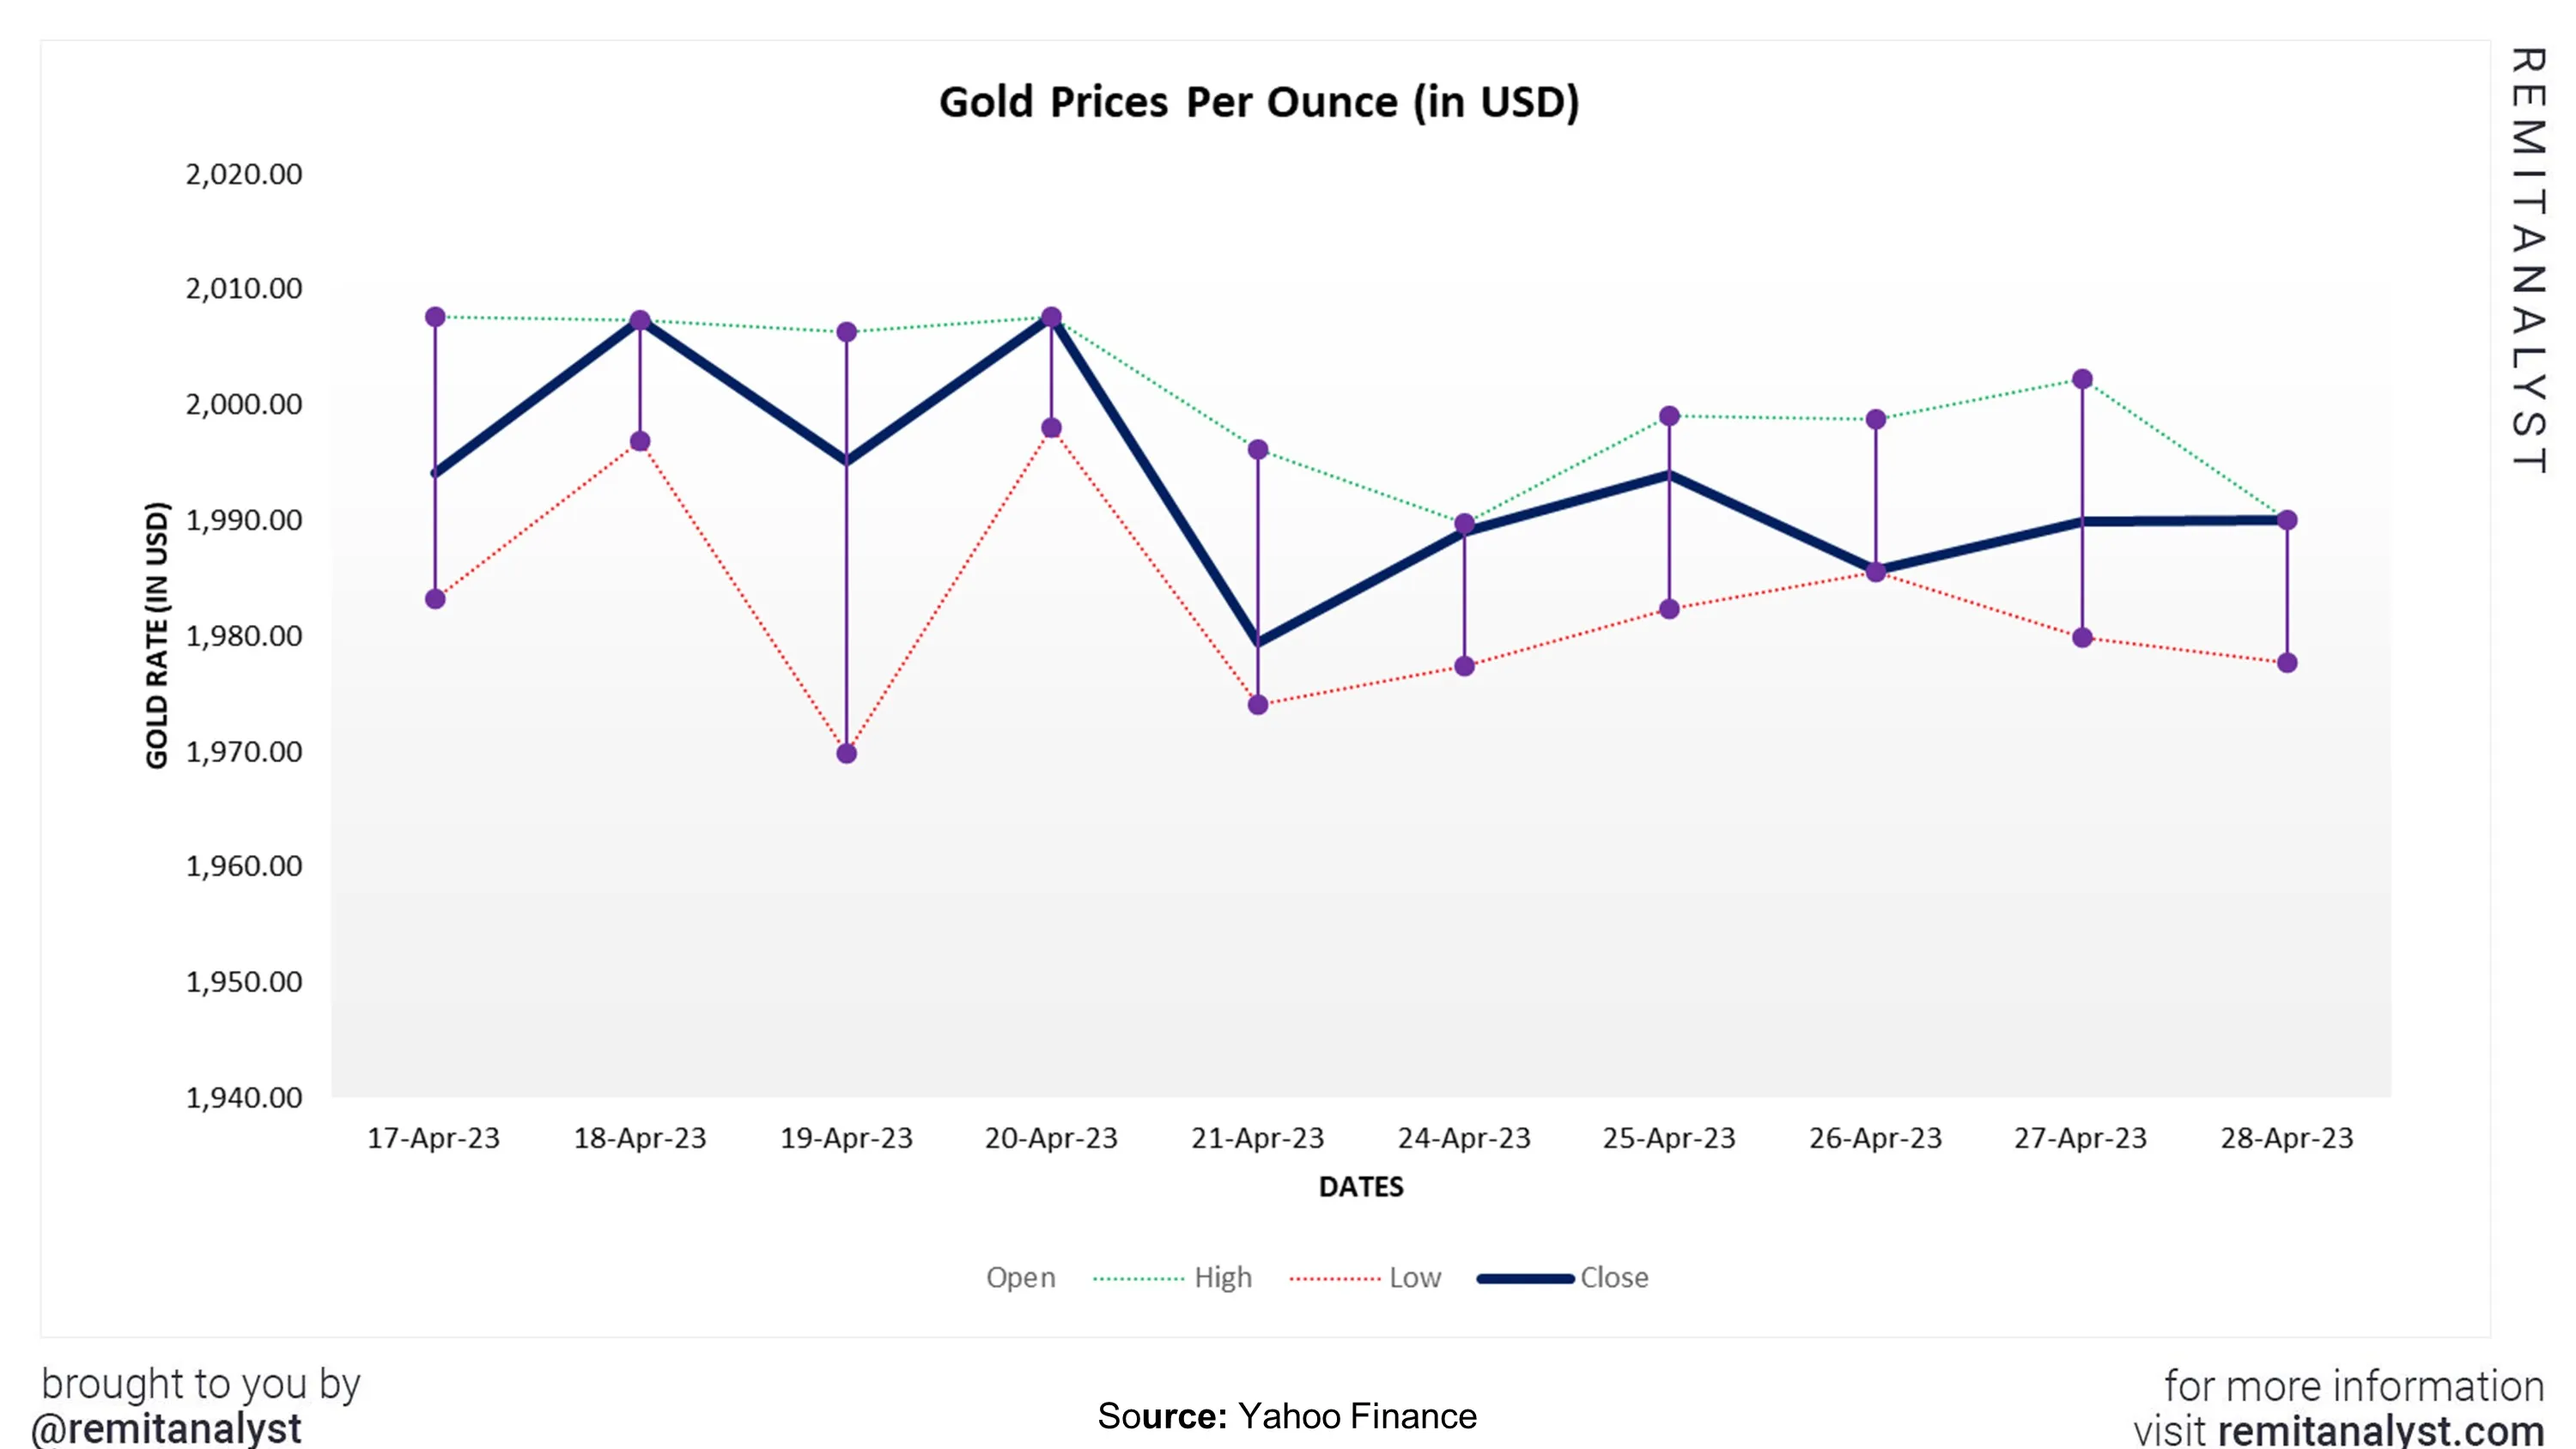 gold-prices-from-17-apr-2023-to-28-apr-2023